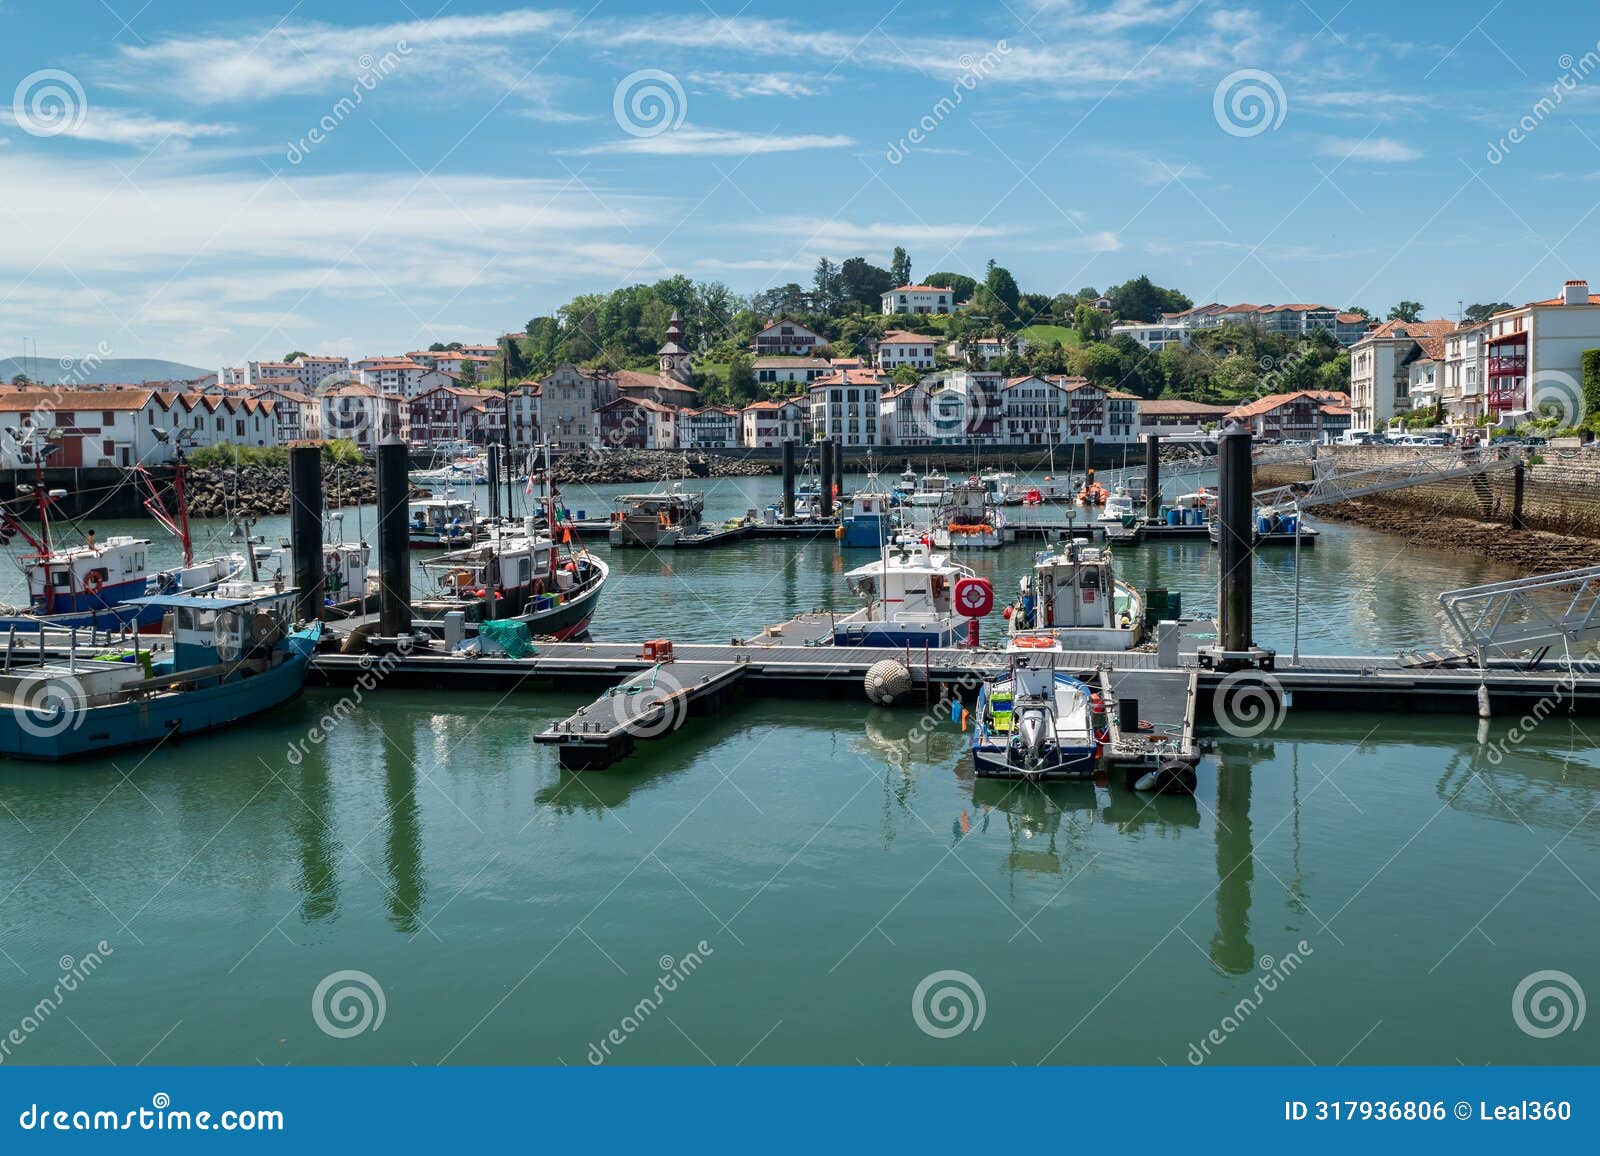 port of saint jean de luz with some boats anchored with part of the city in the background